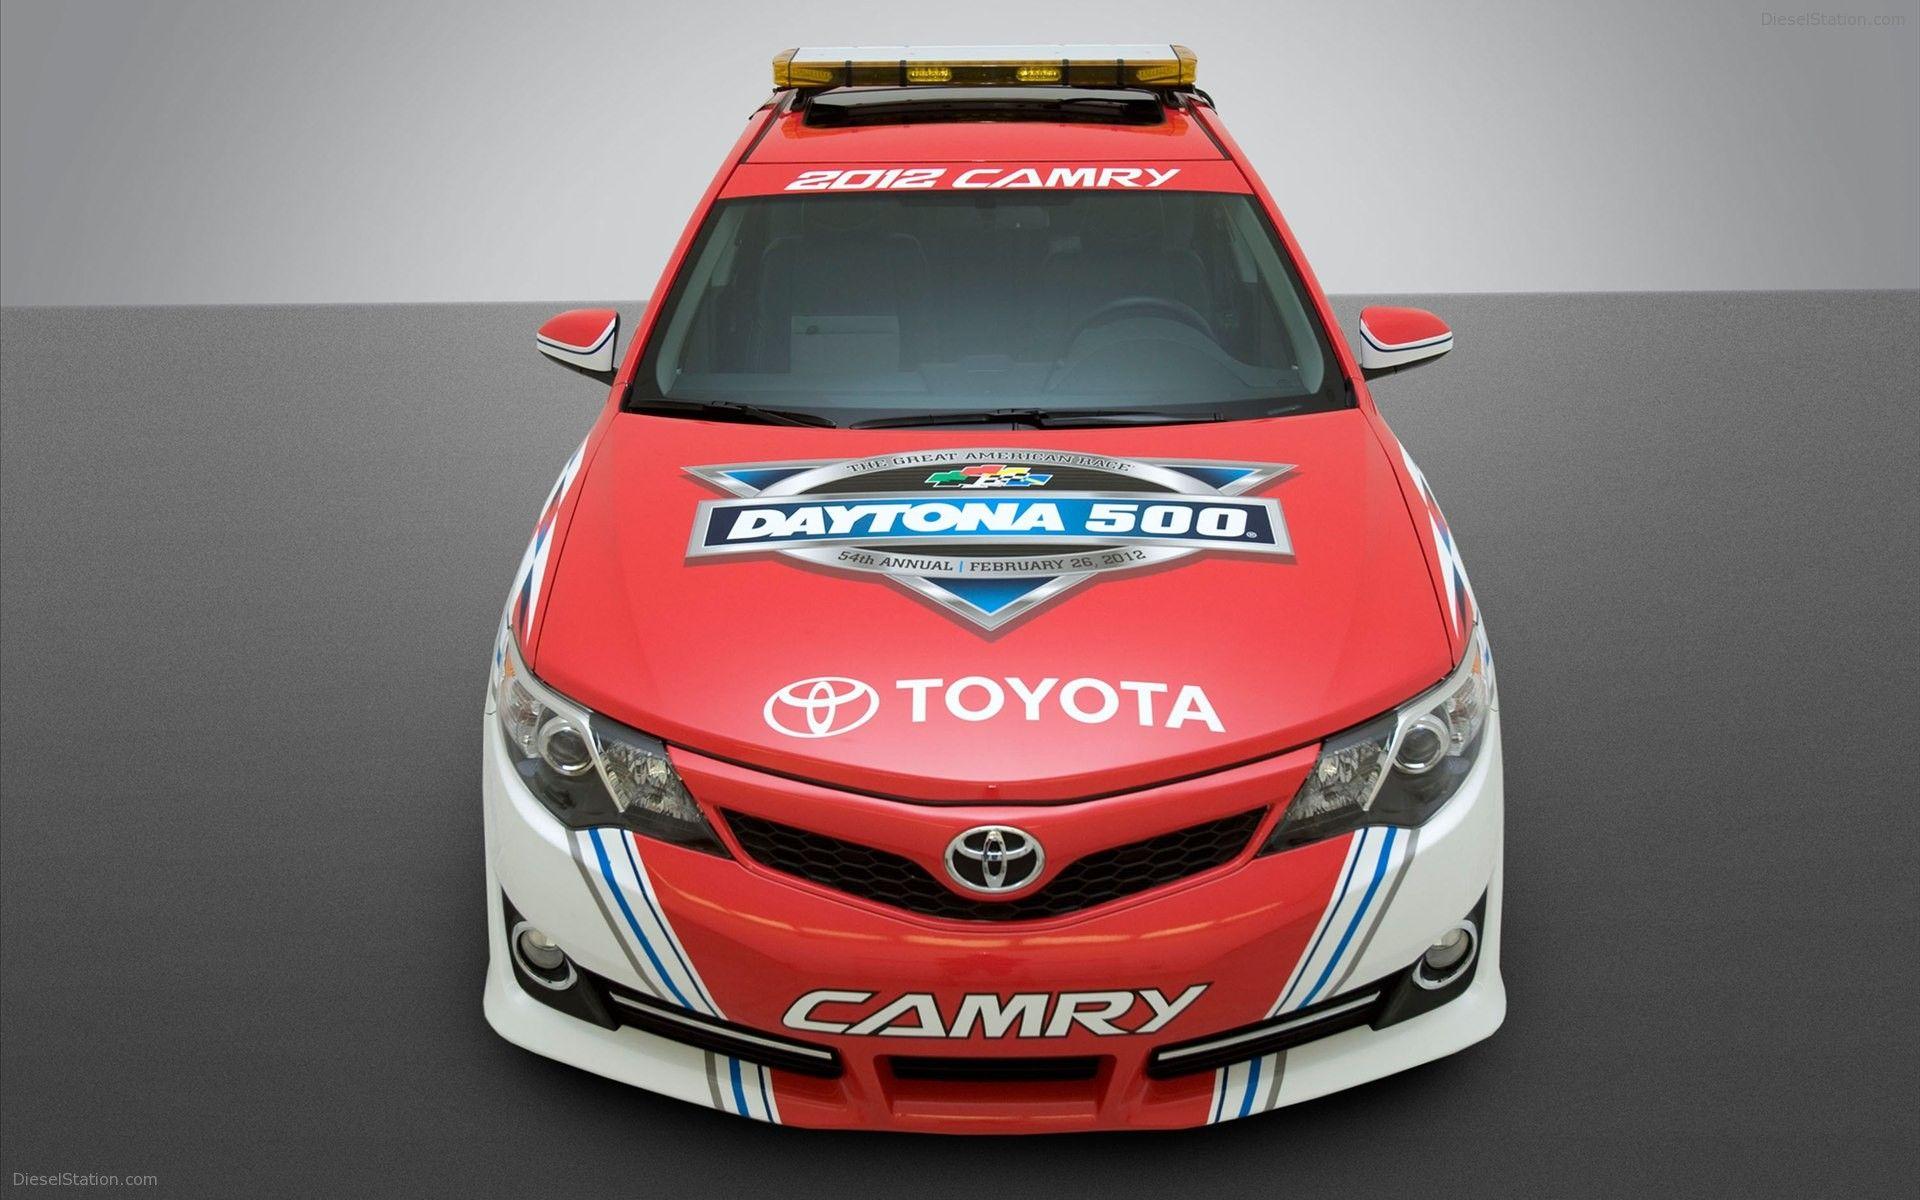 Toyota Camry 500 Pace Car 2012 Widescreen Exotic Car